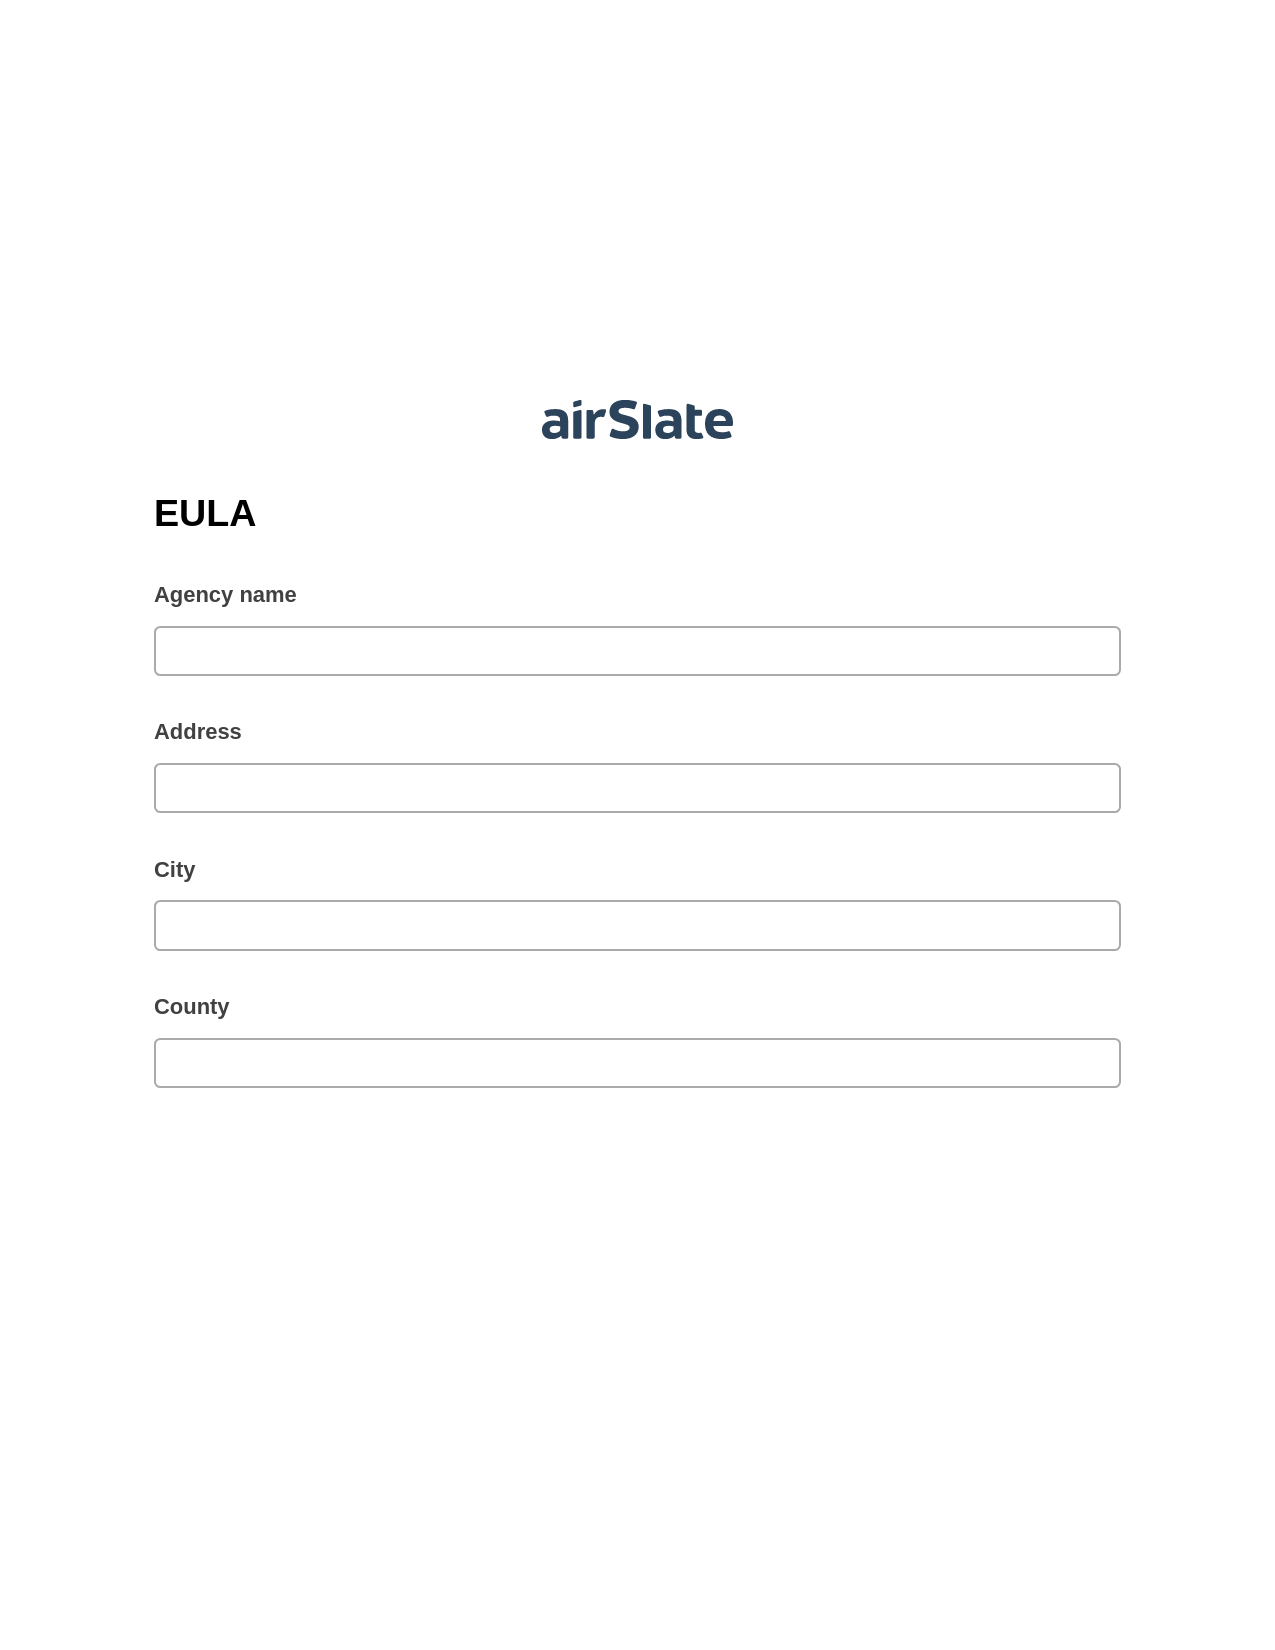 EULA Pre-fill from Google Sheets Bot, Update Salesforce Record Bot, Export to Salesforce Bot